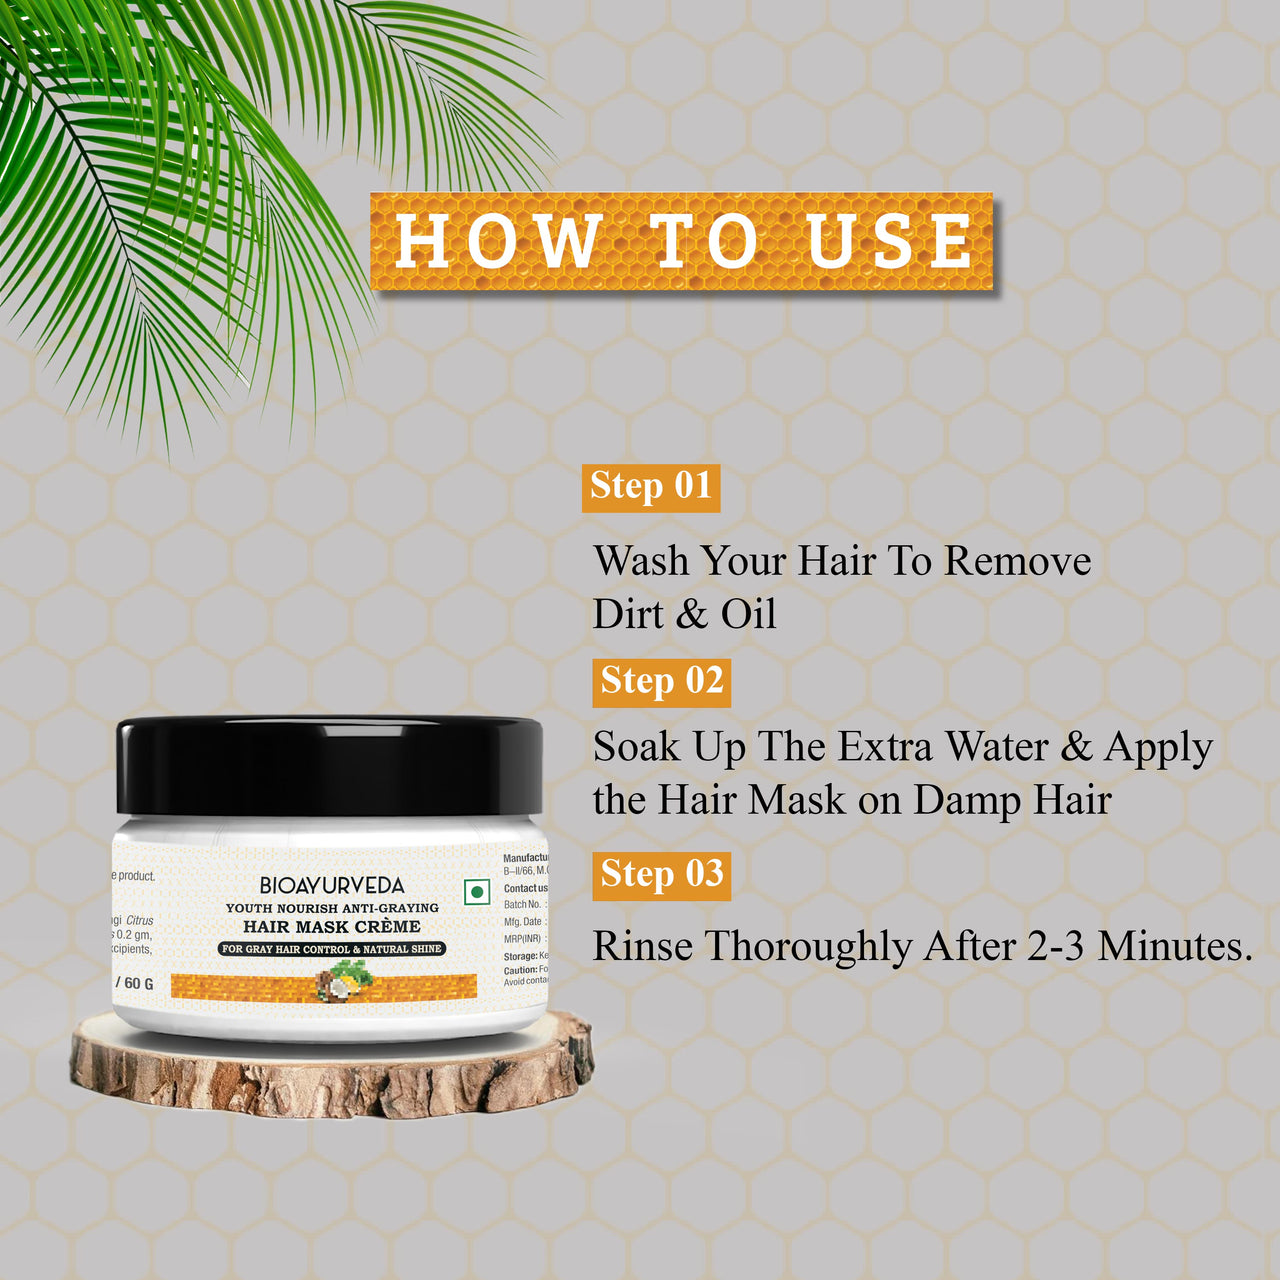 How to use Hair Mask Cream 60gm